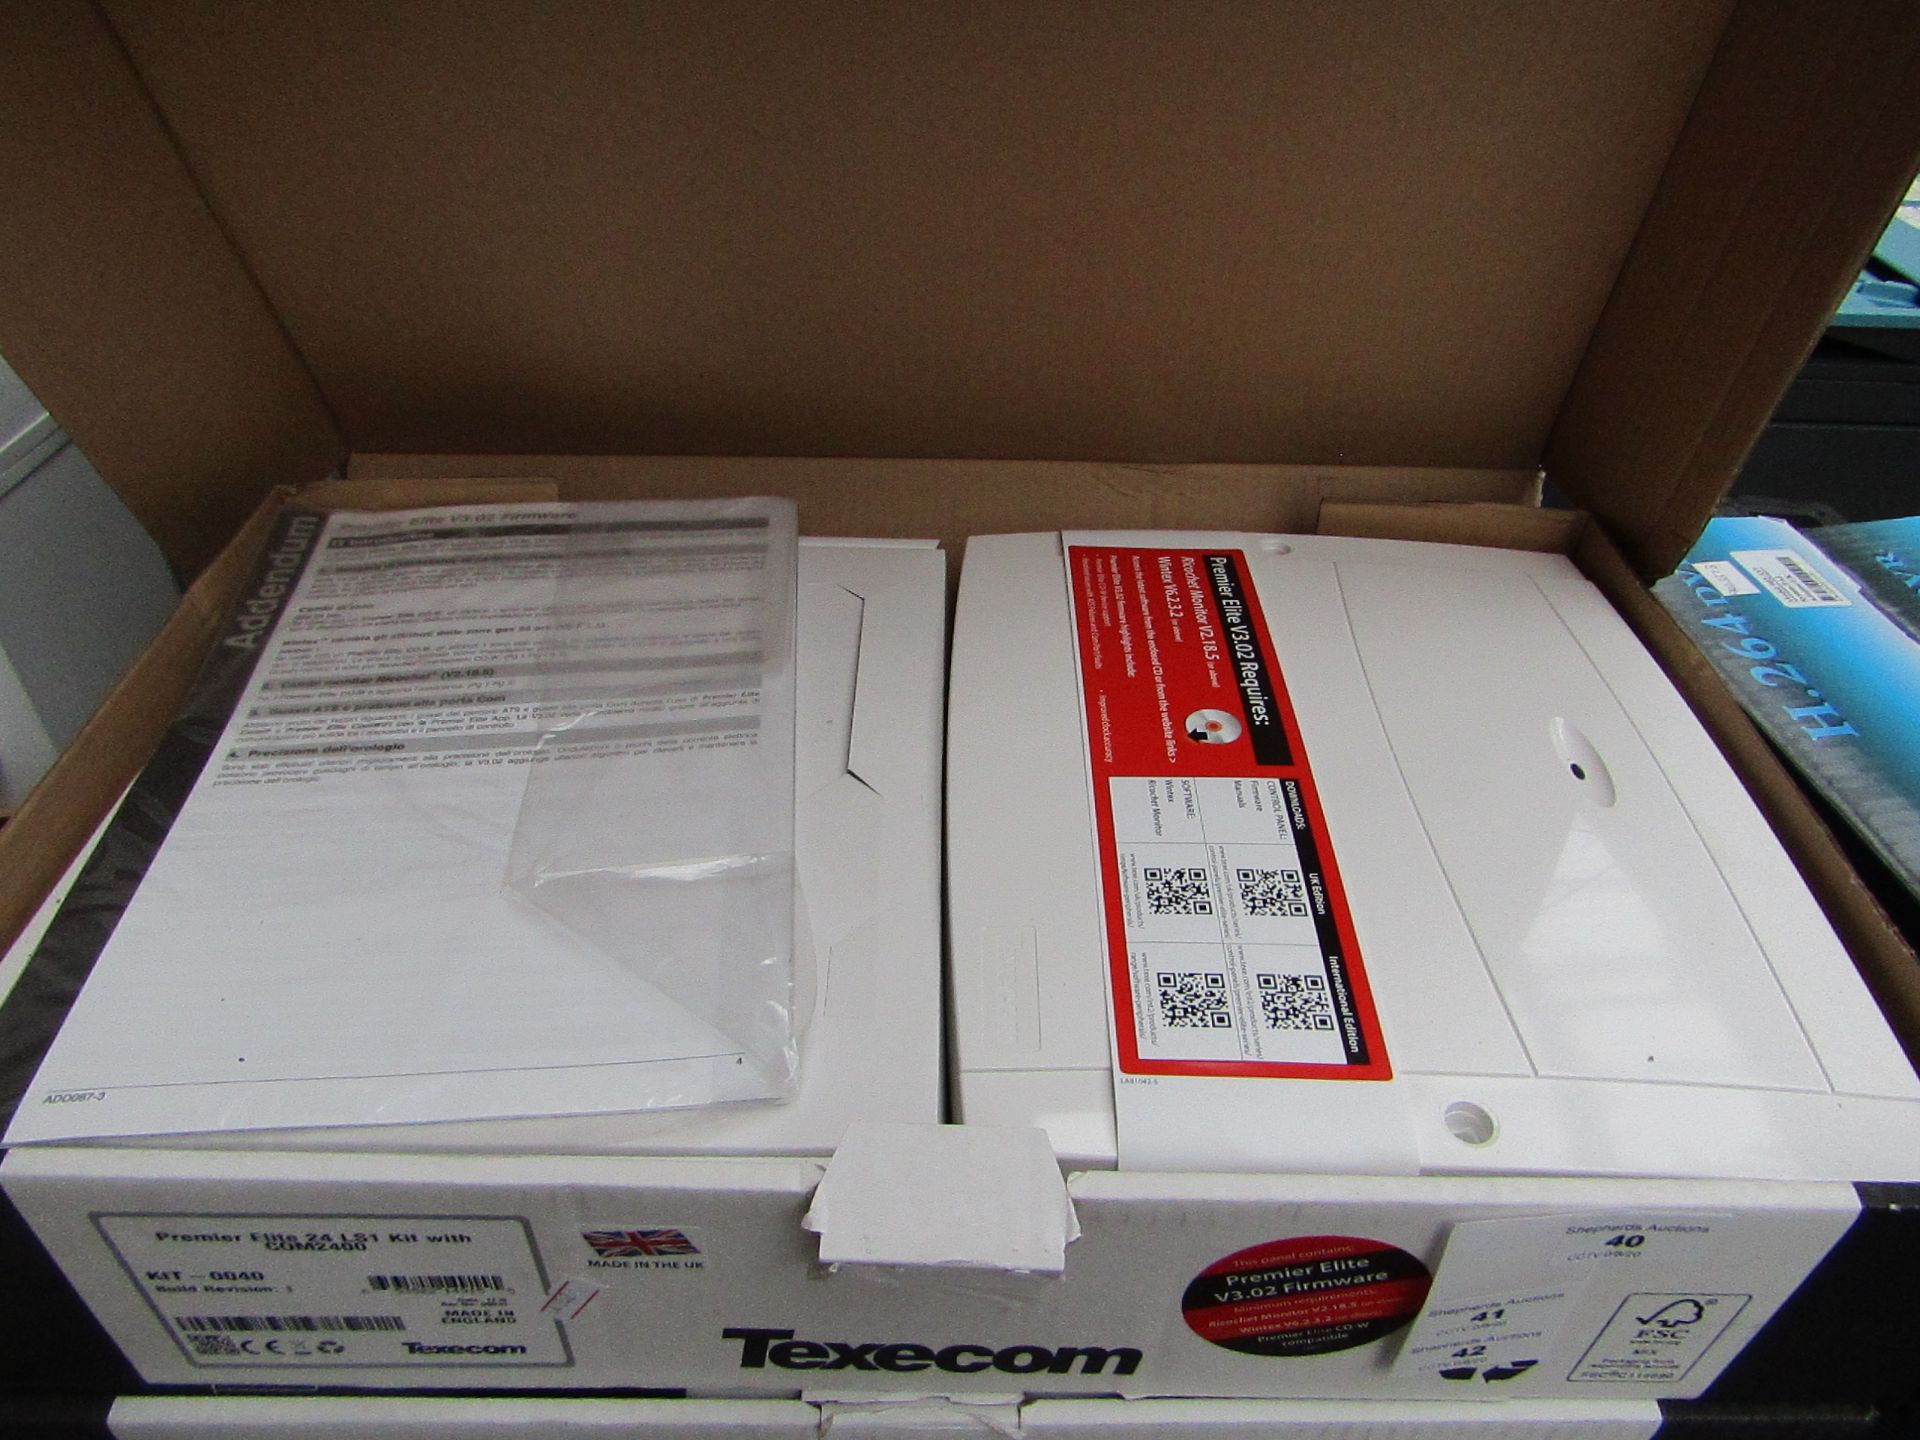 Texecom - Premier Elite 24 LS1 Kit with COM2400 - Untested & Boxed.